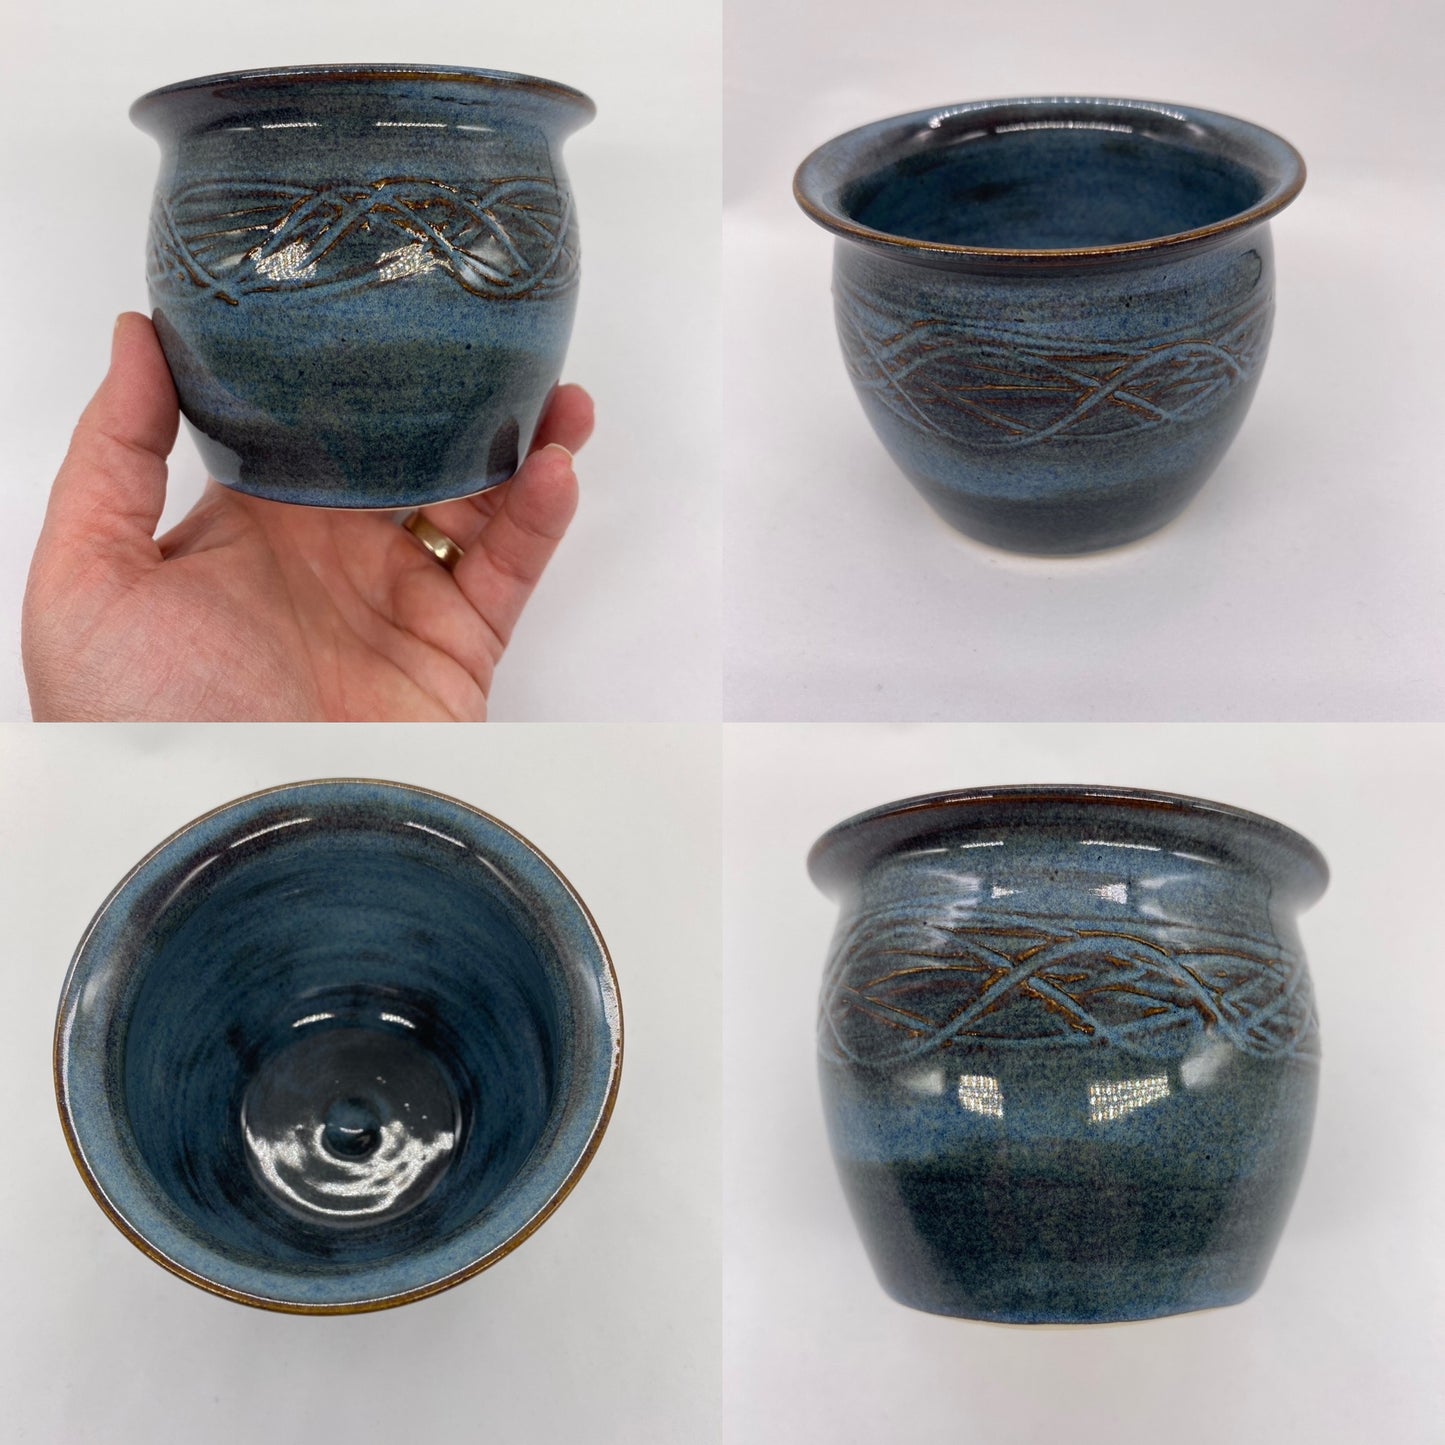 Hand thrown cup - stoned denim with carving